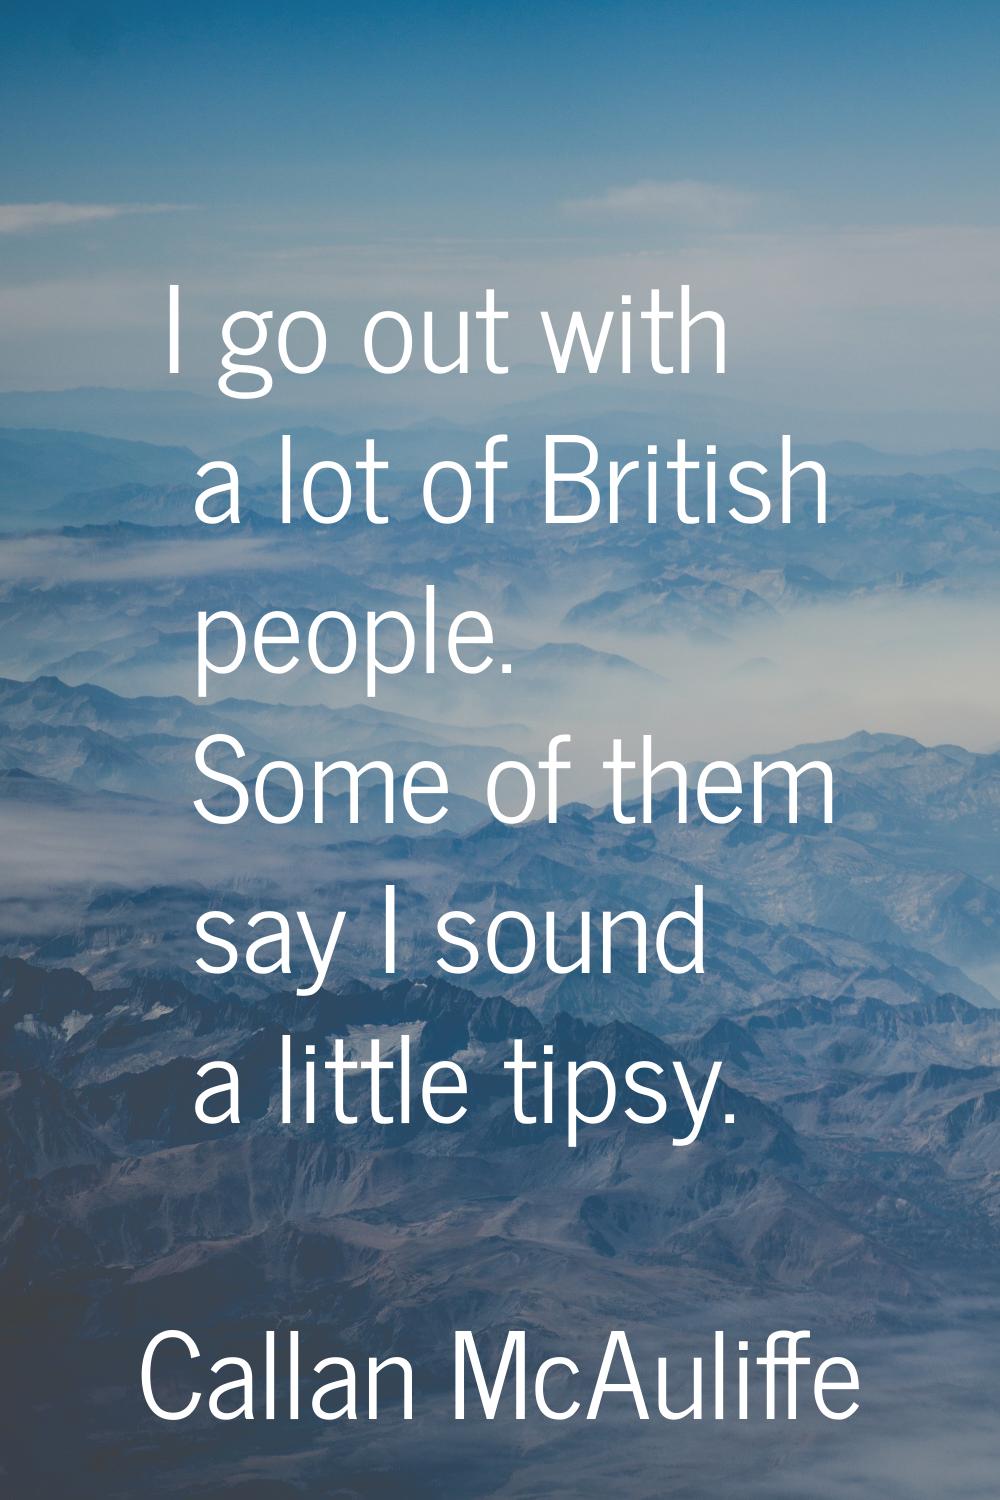 I go out with a lot of British people. Some of them say I sound a little tipsy.